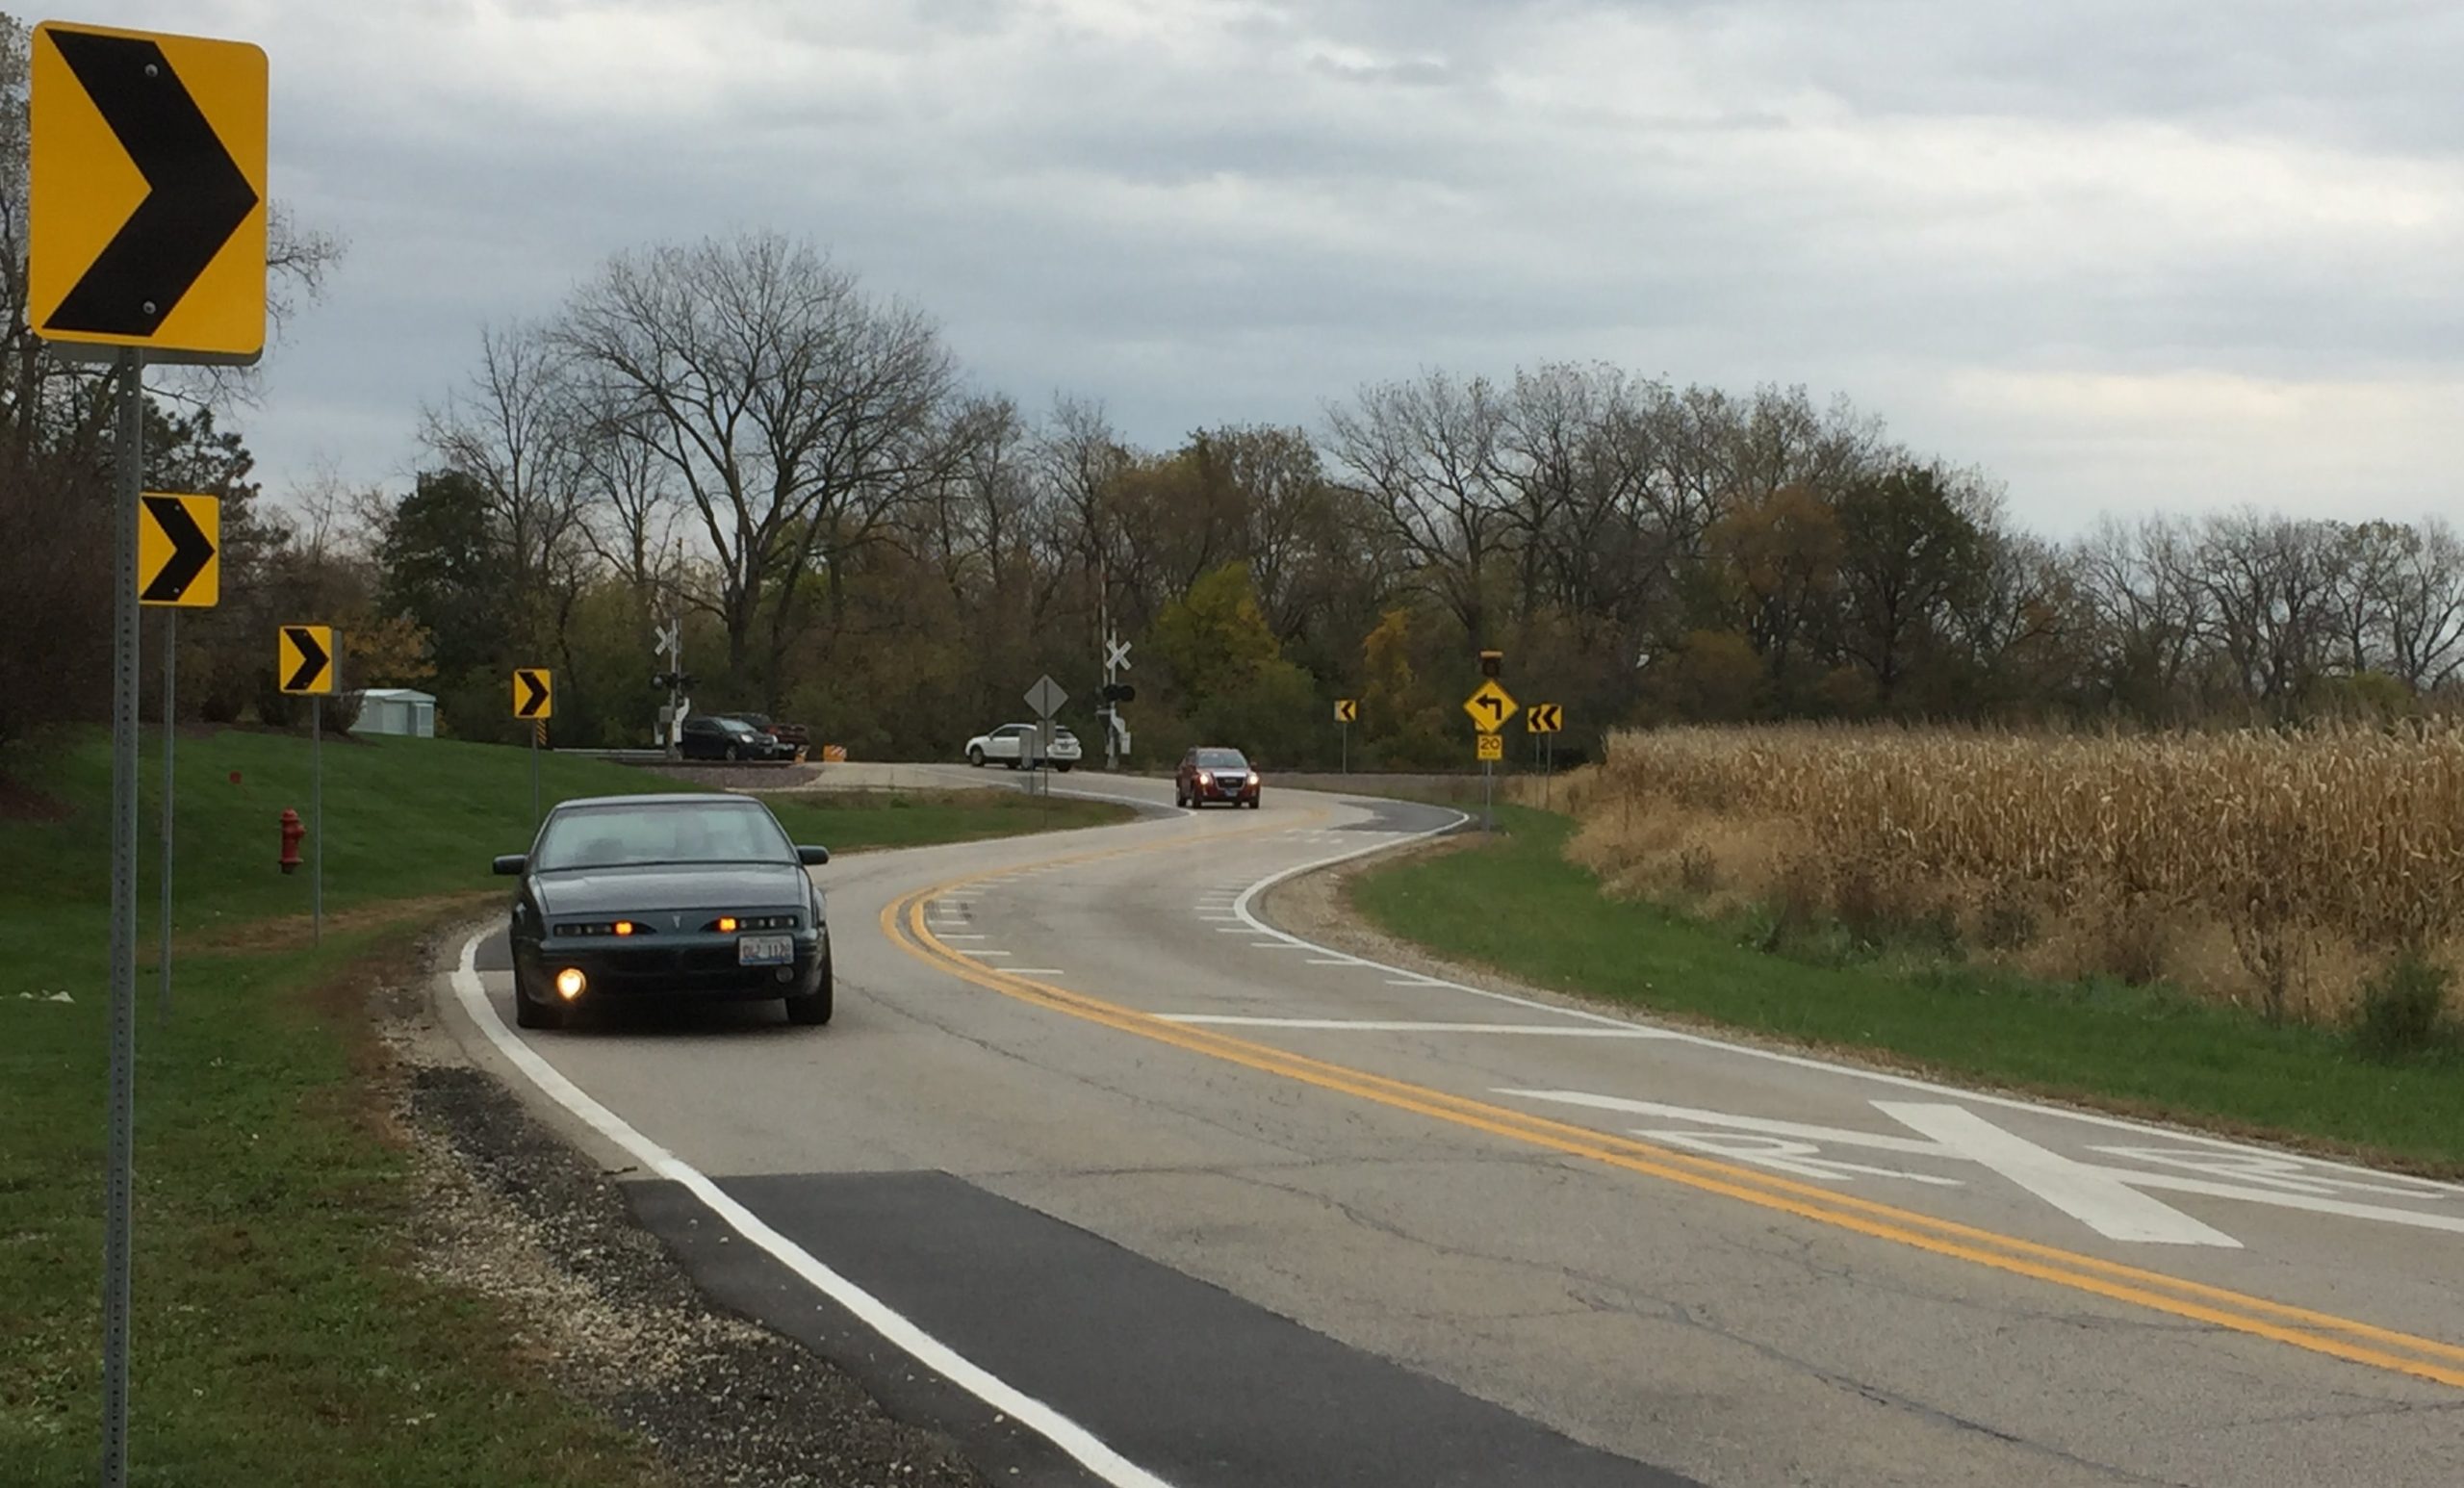 Cars heading east on Kreutzer Road from Route 47 slow to take a Le Mans-like double curve before reaching a railroad cross and small bridge over a creek. The village board will considering applying for a state grant to help pay for a project that would straighten the roadway.